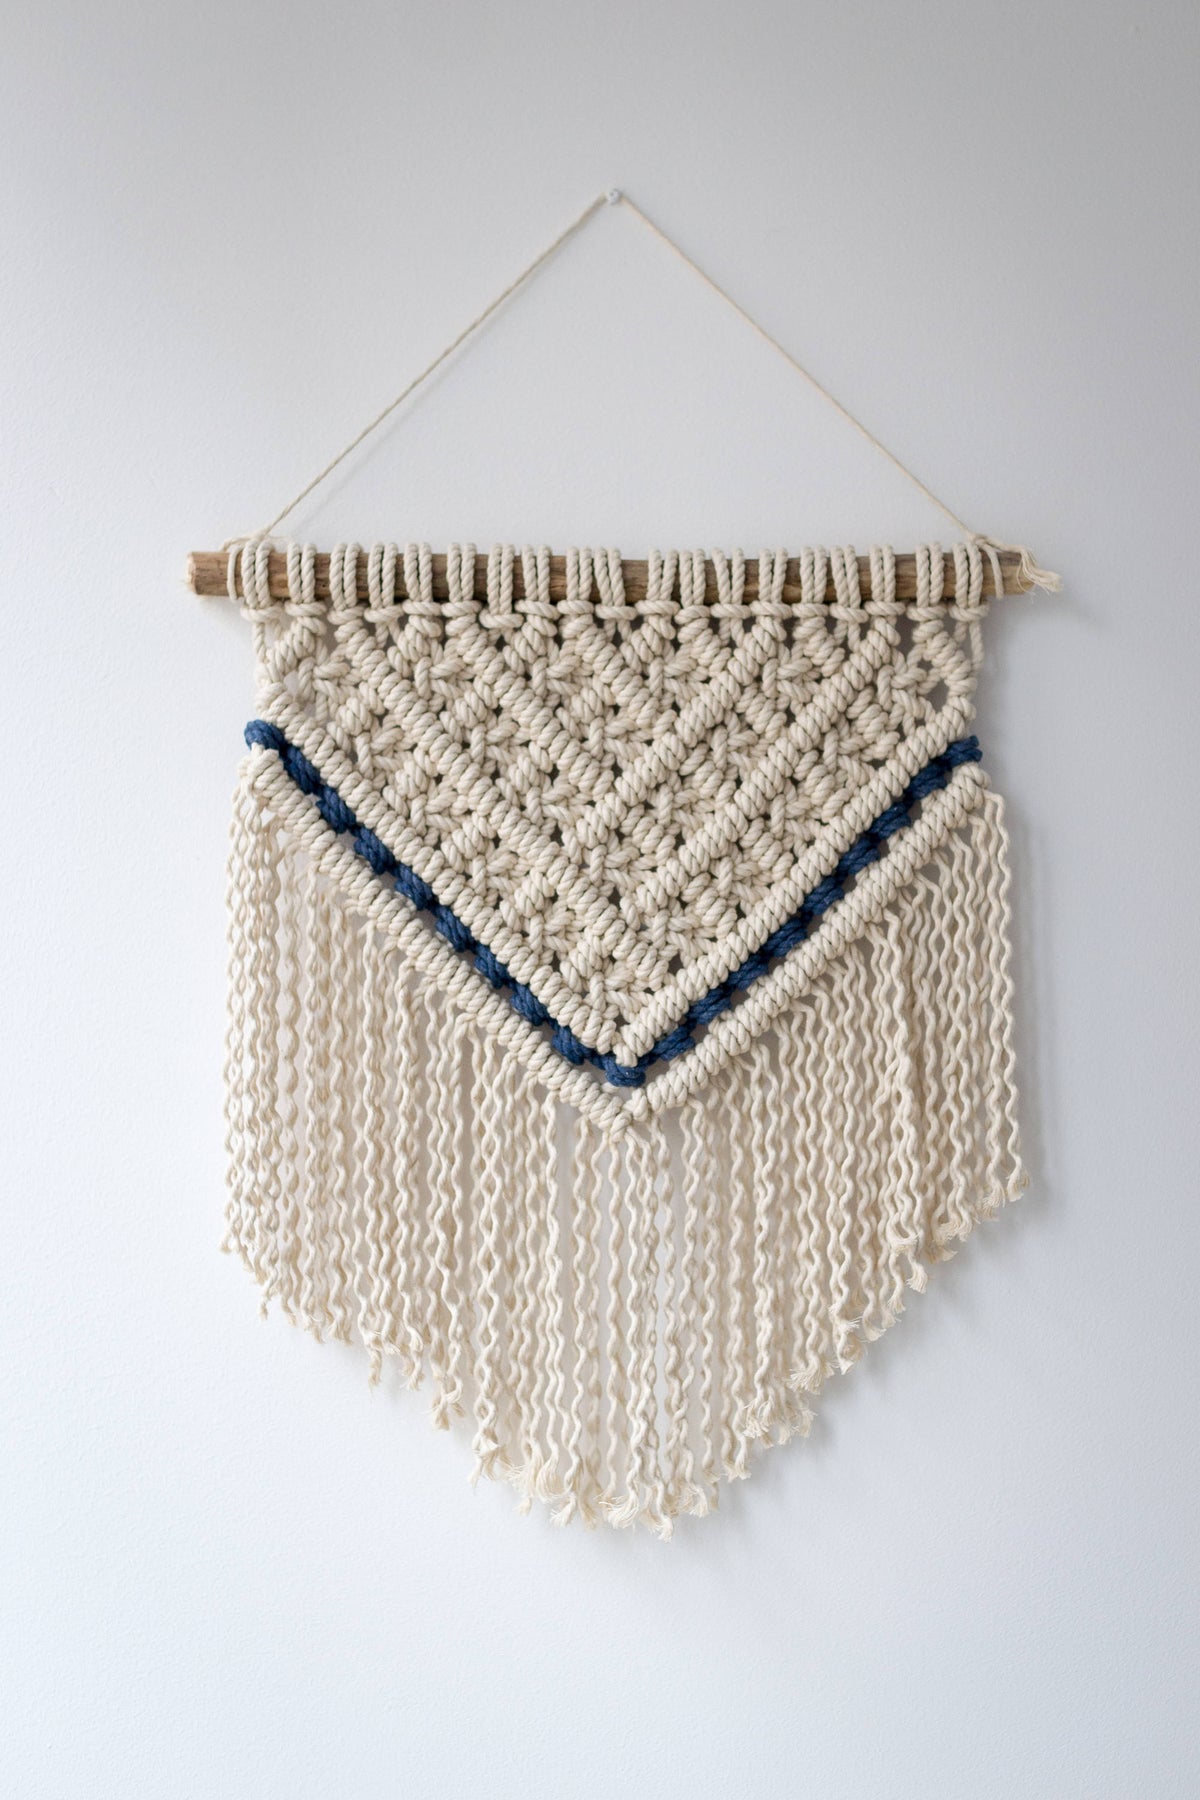 Macrame wall hanging with navy details